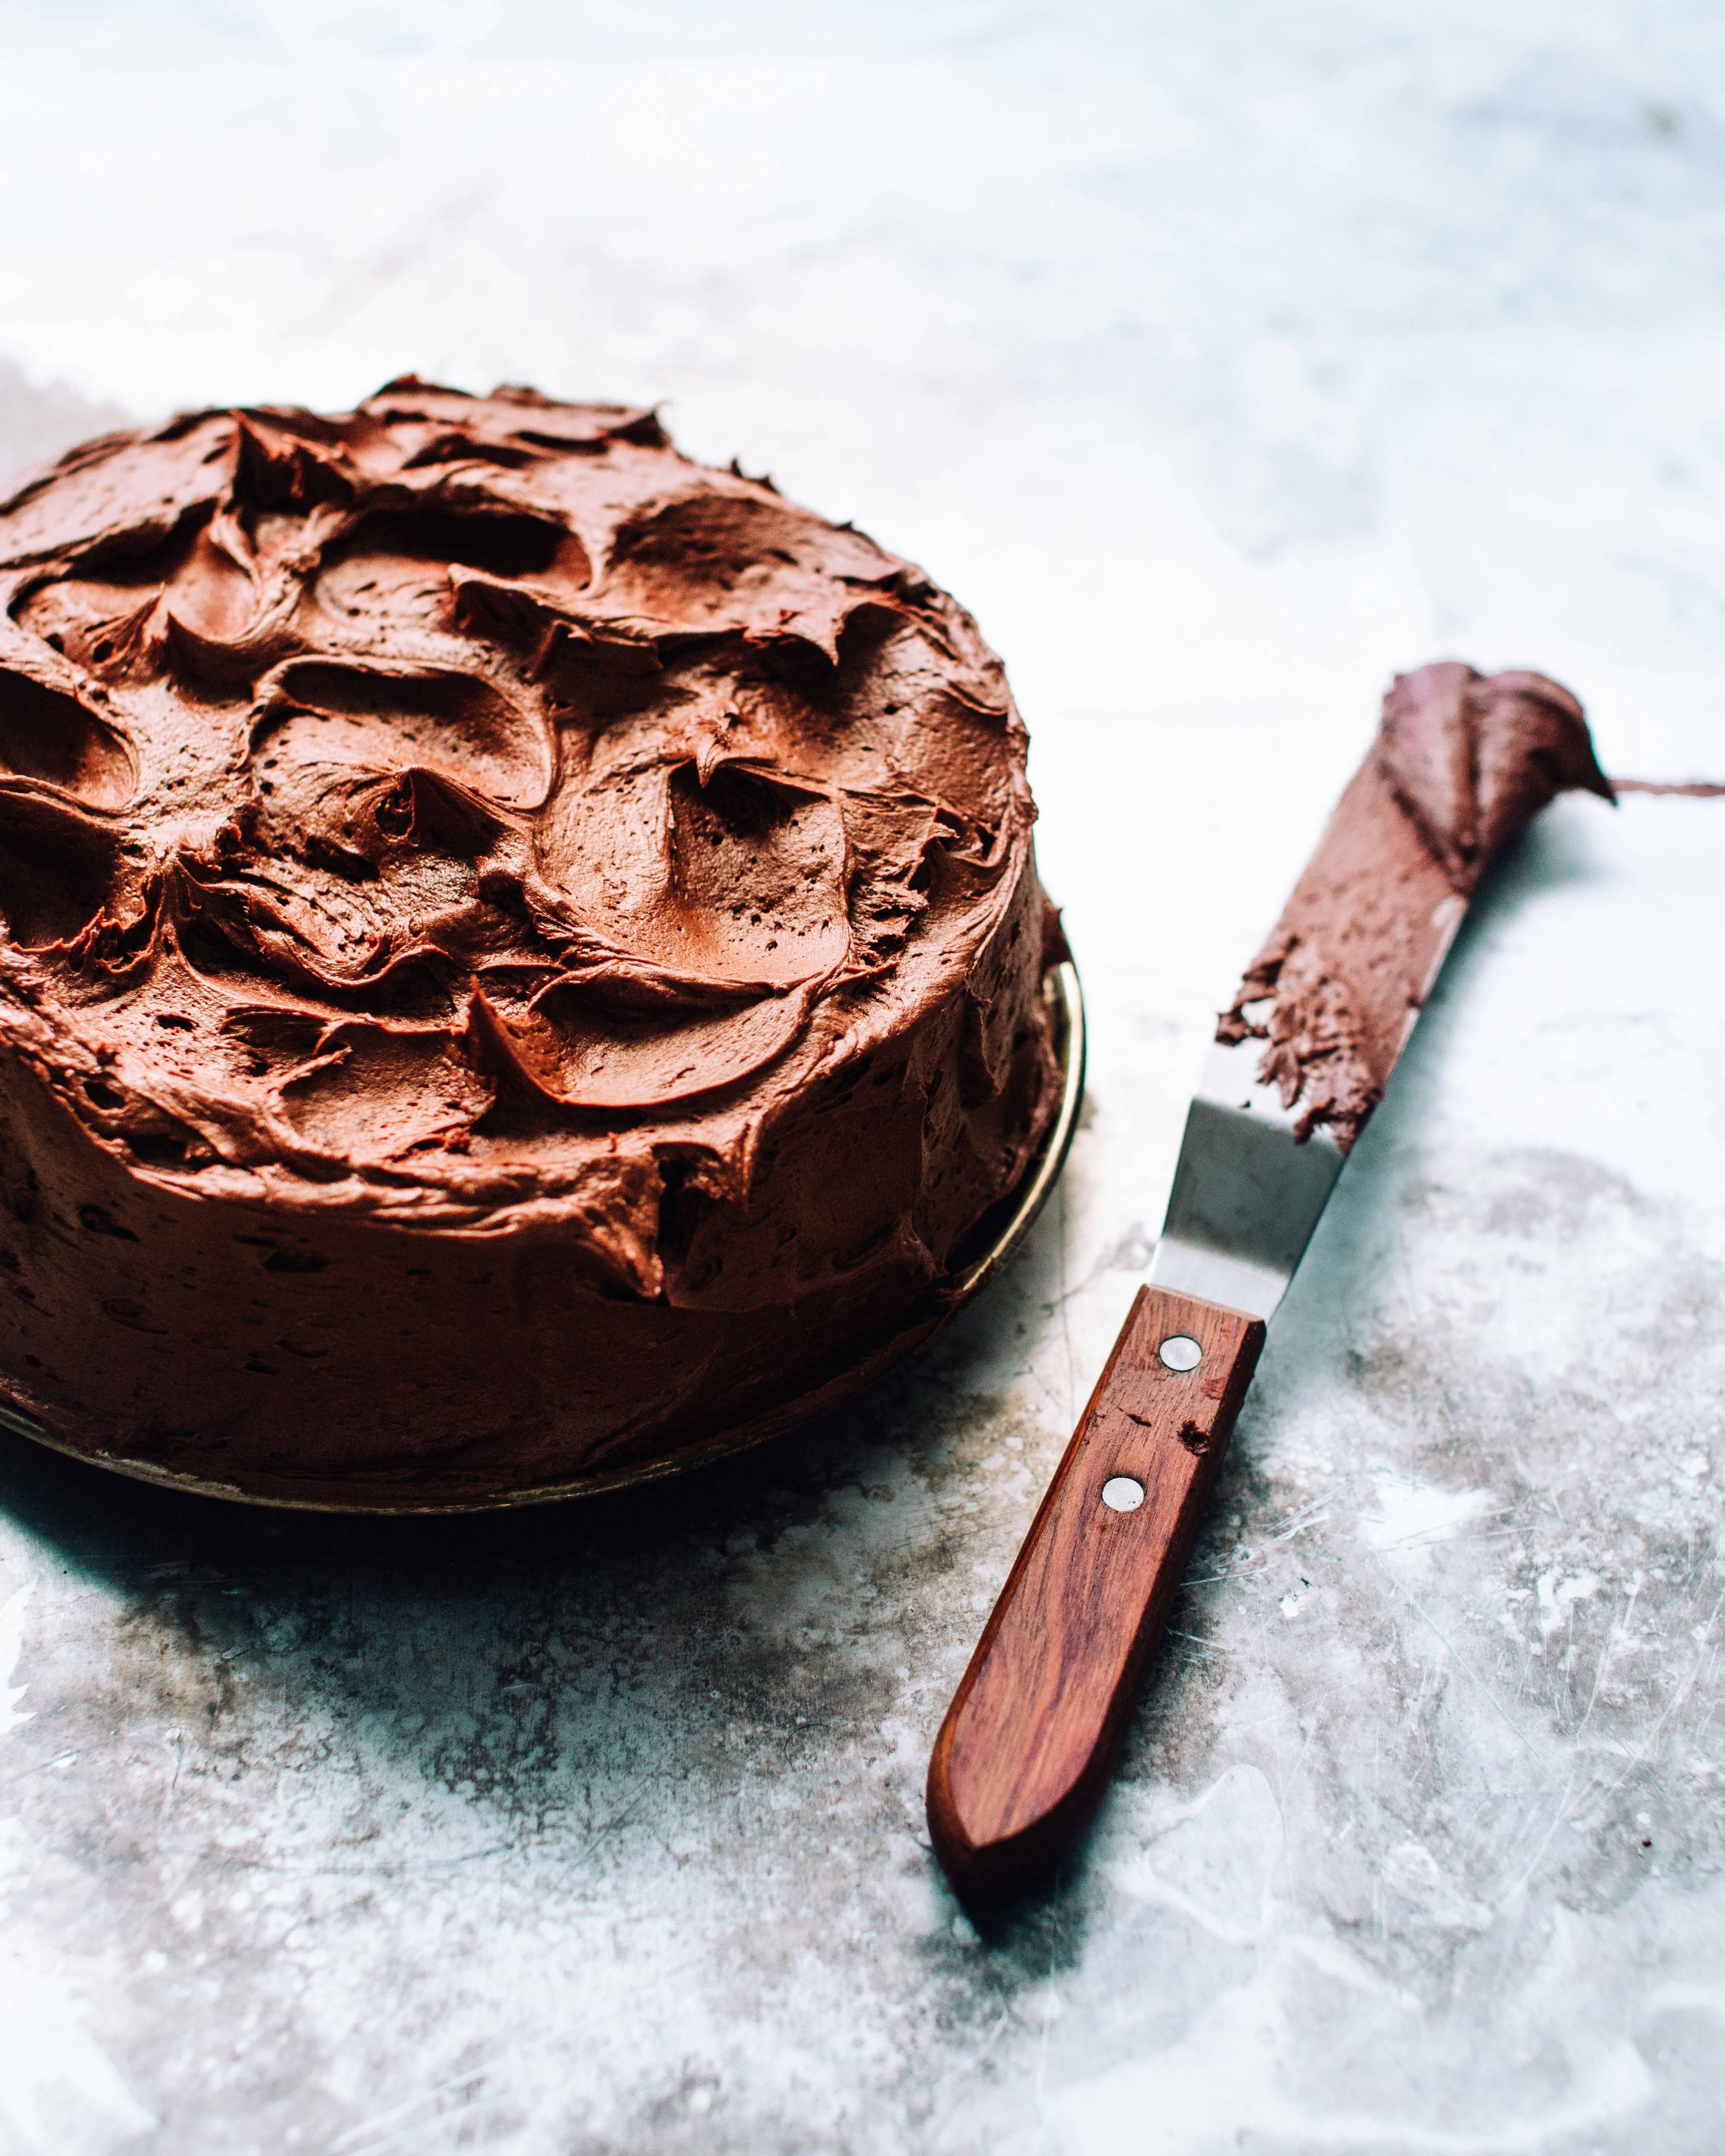 The Best Step-by-Step Guide: Baking a Chocolate Cake